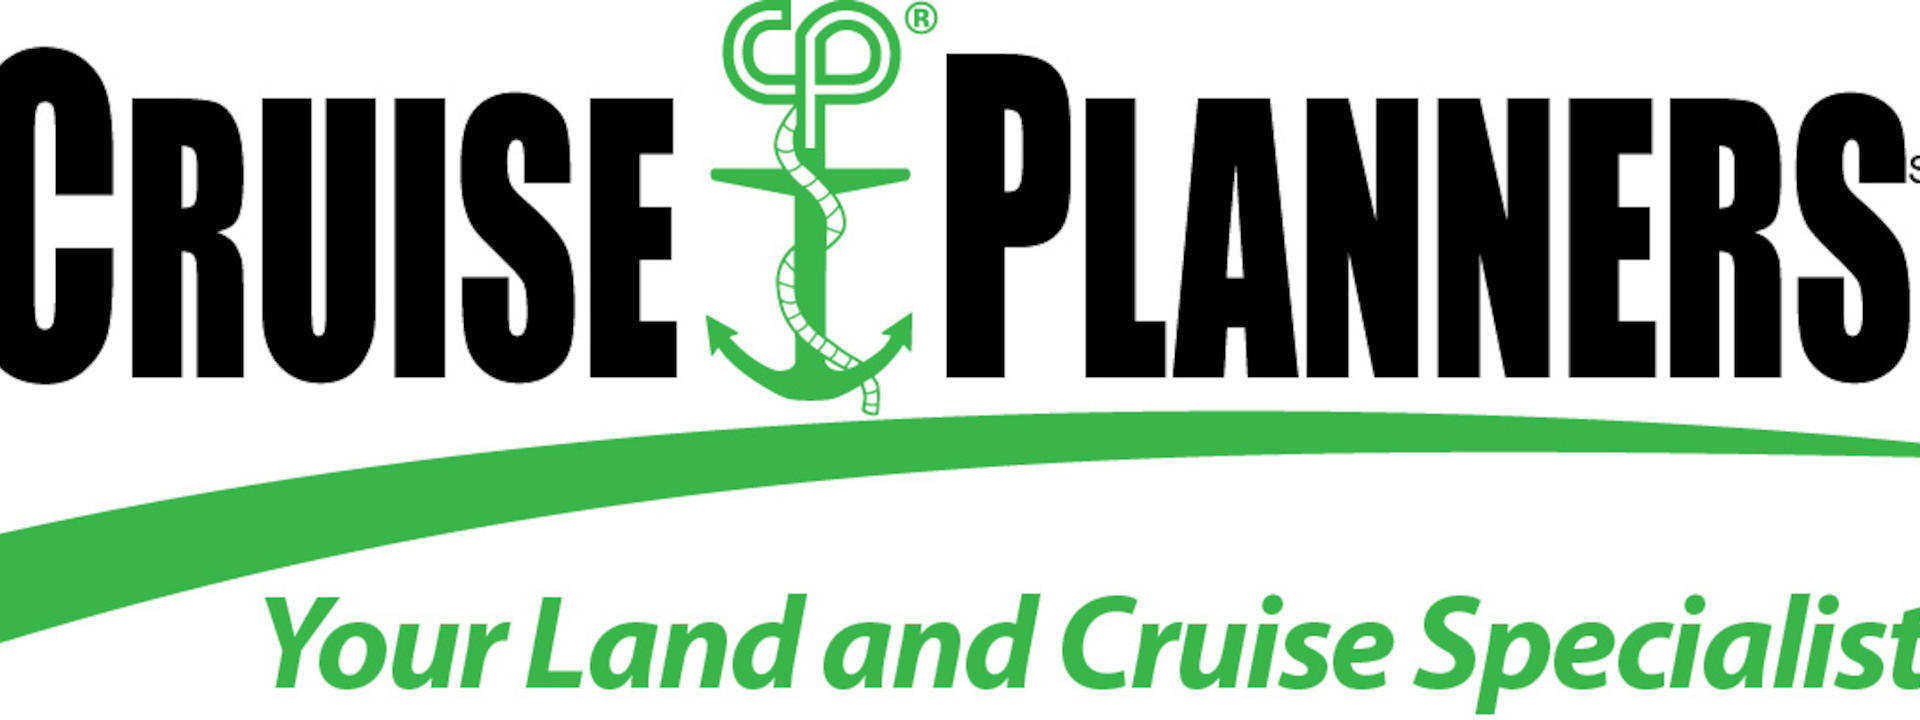 Cruise Planners | Travel agent in , United States